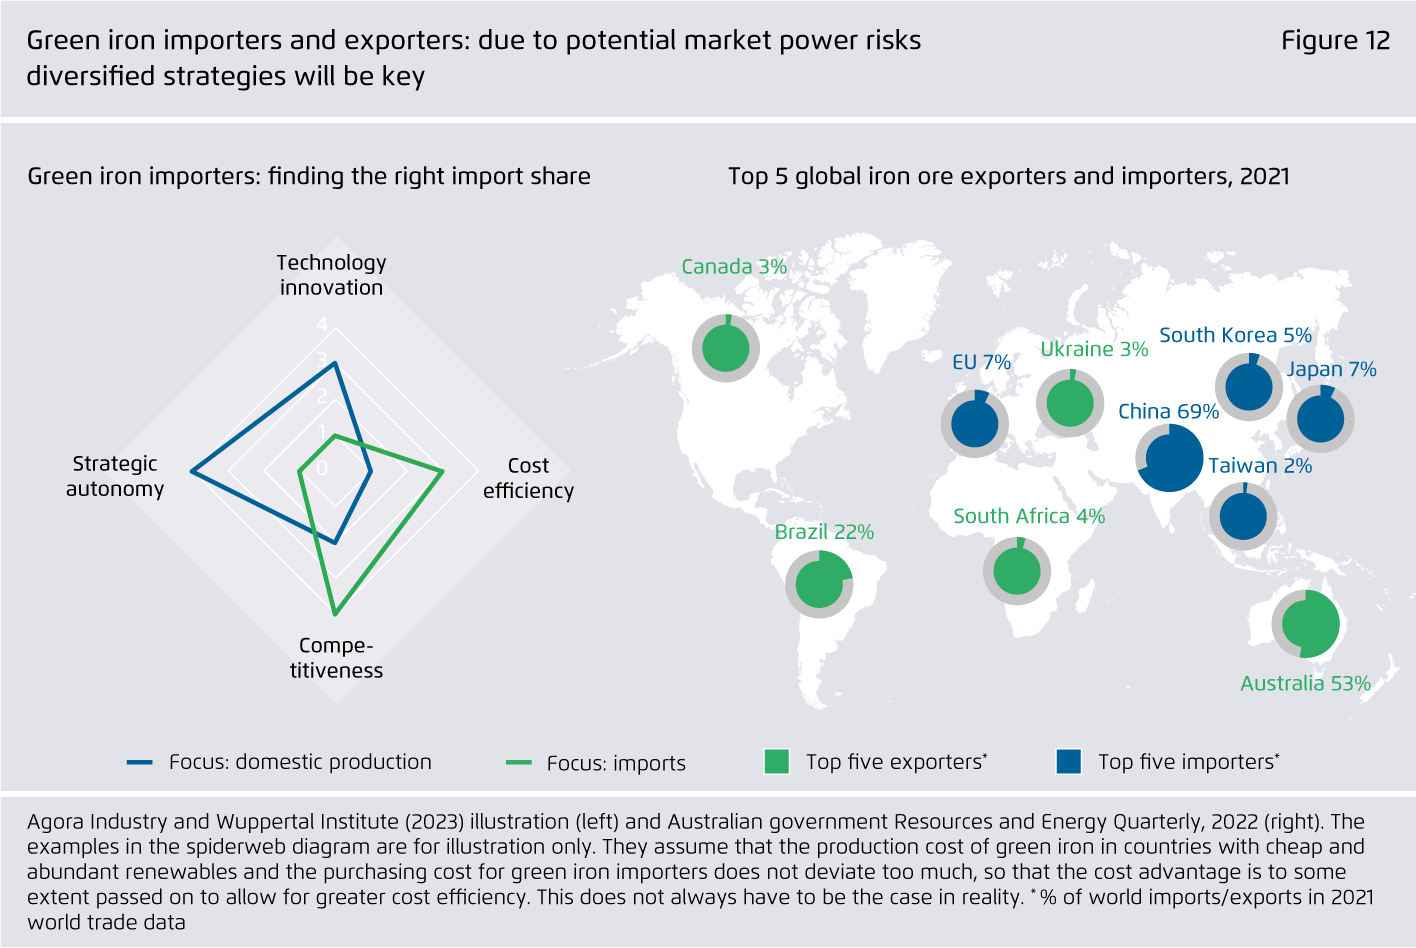 Preview for Green iron importers and exporters: due to potential market power risks diversified strategies will be key